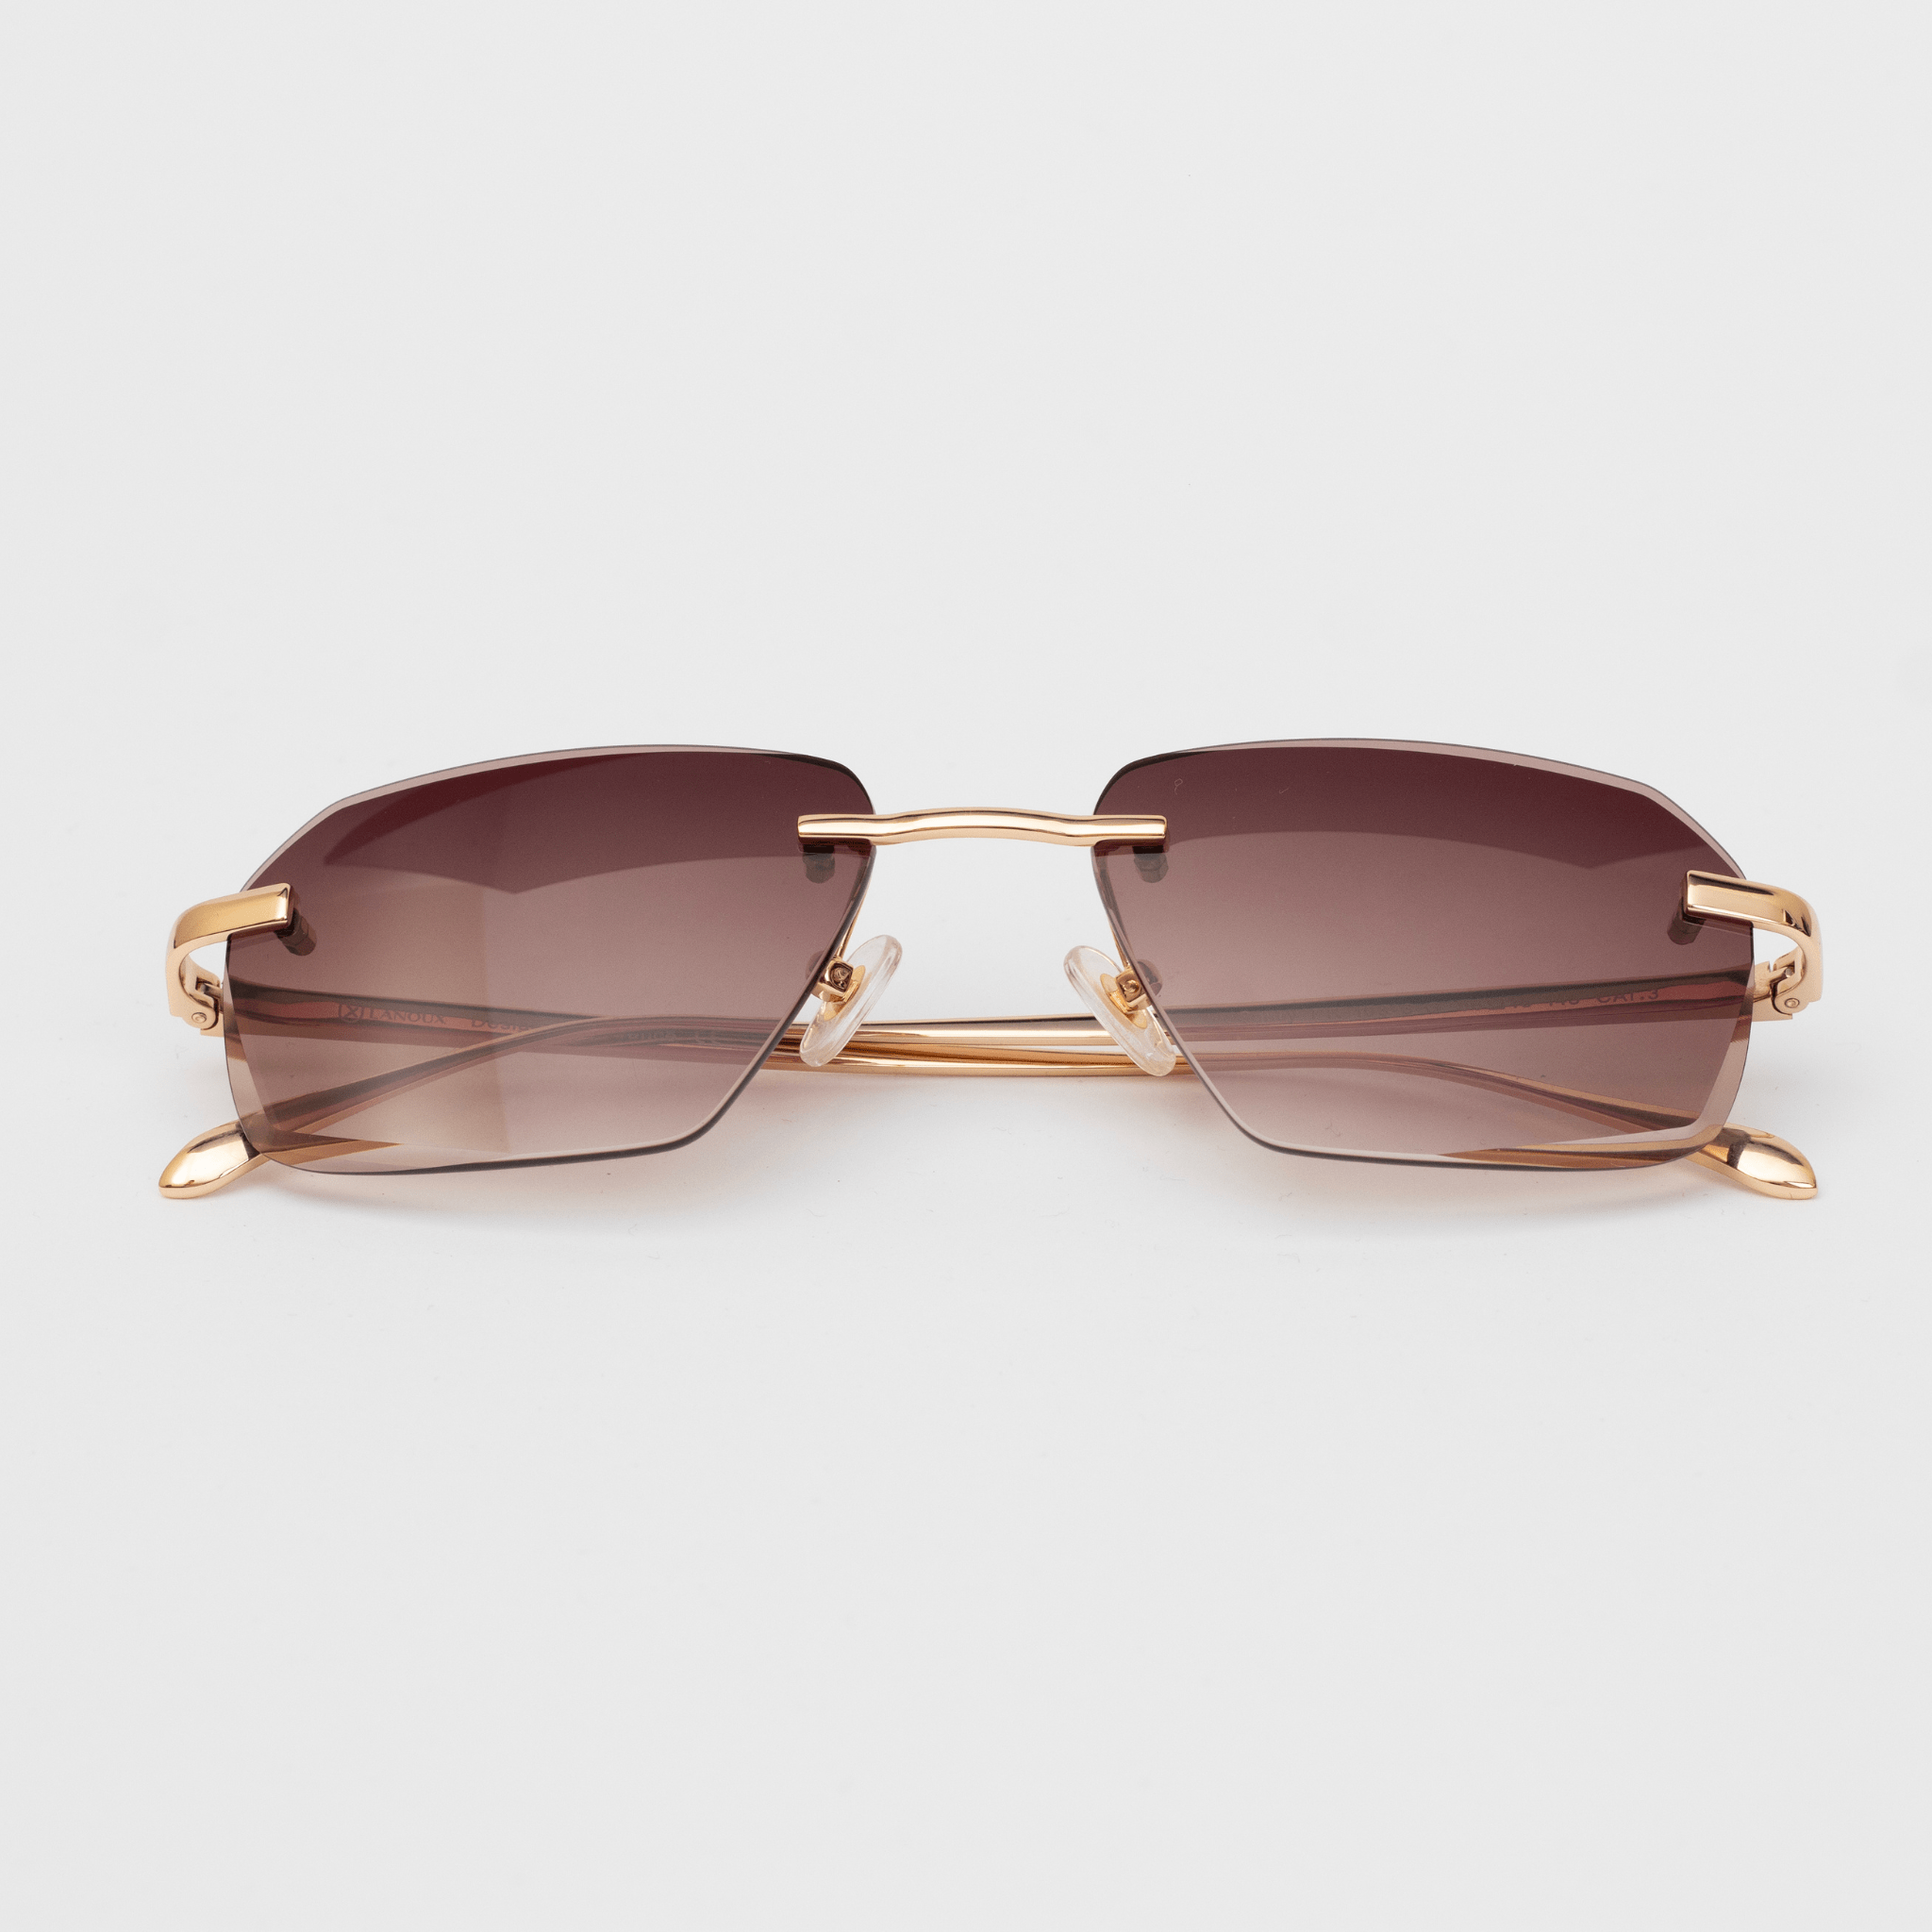 "Model Sancy sunglasses featuring a sophisticated brown gradient, diamond-cut, rimless design with elegant 18K gold hardware, showcased against a white background.